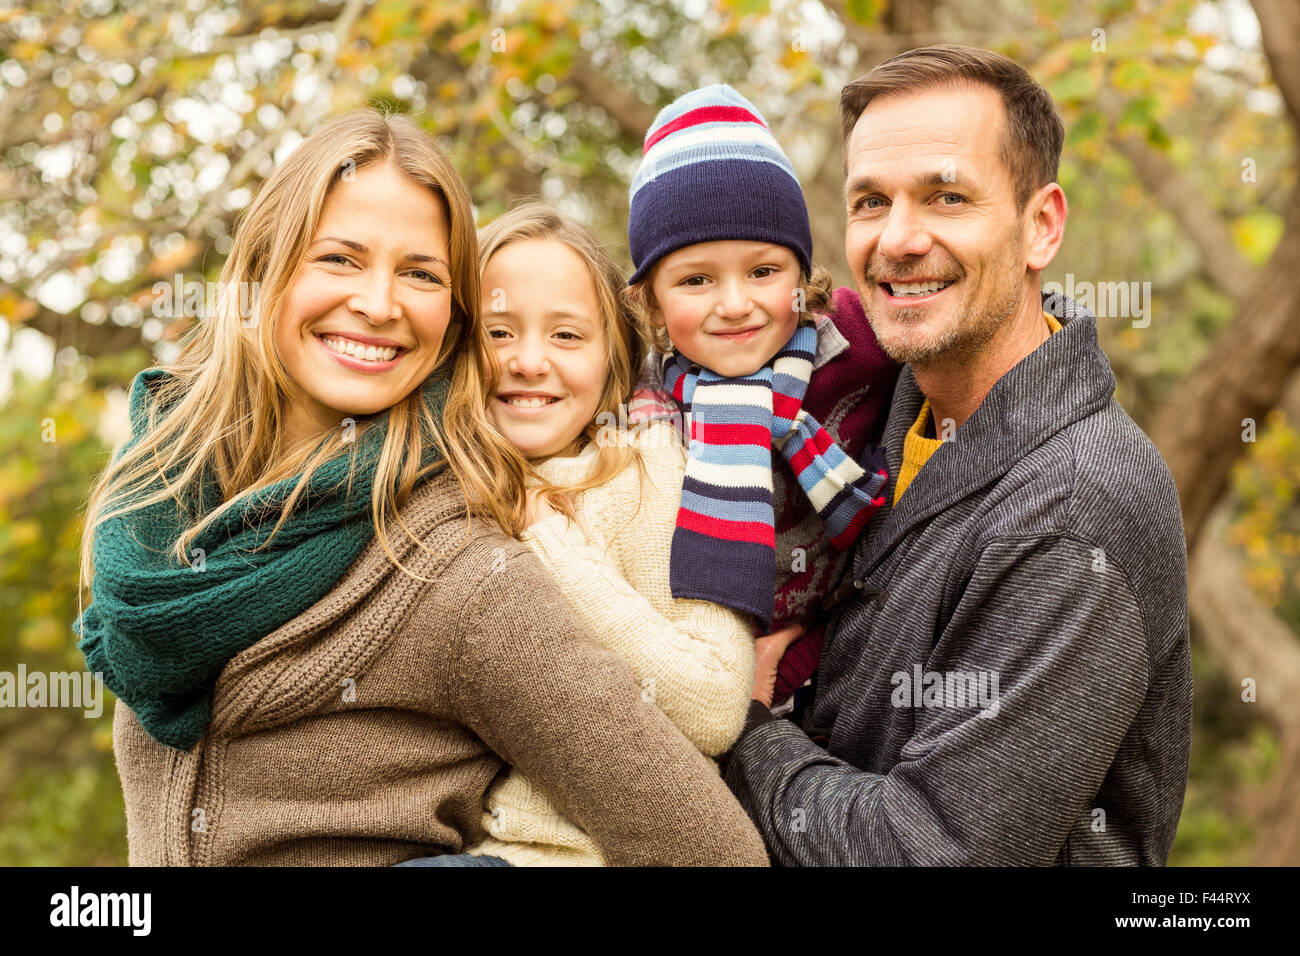 Smiling young family posing together Stock Photo